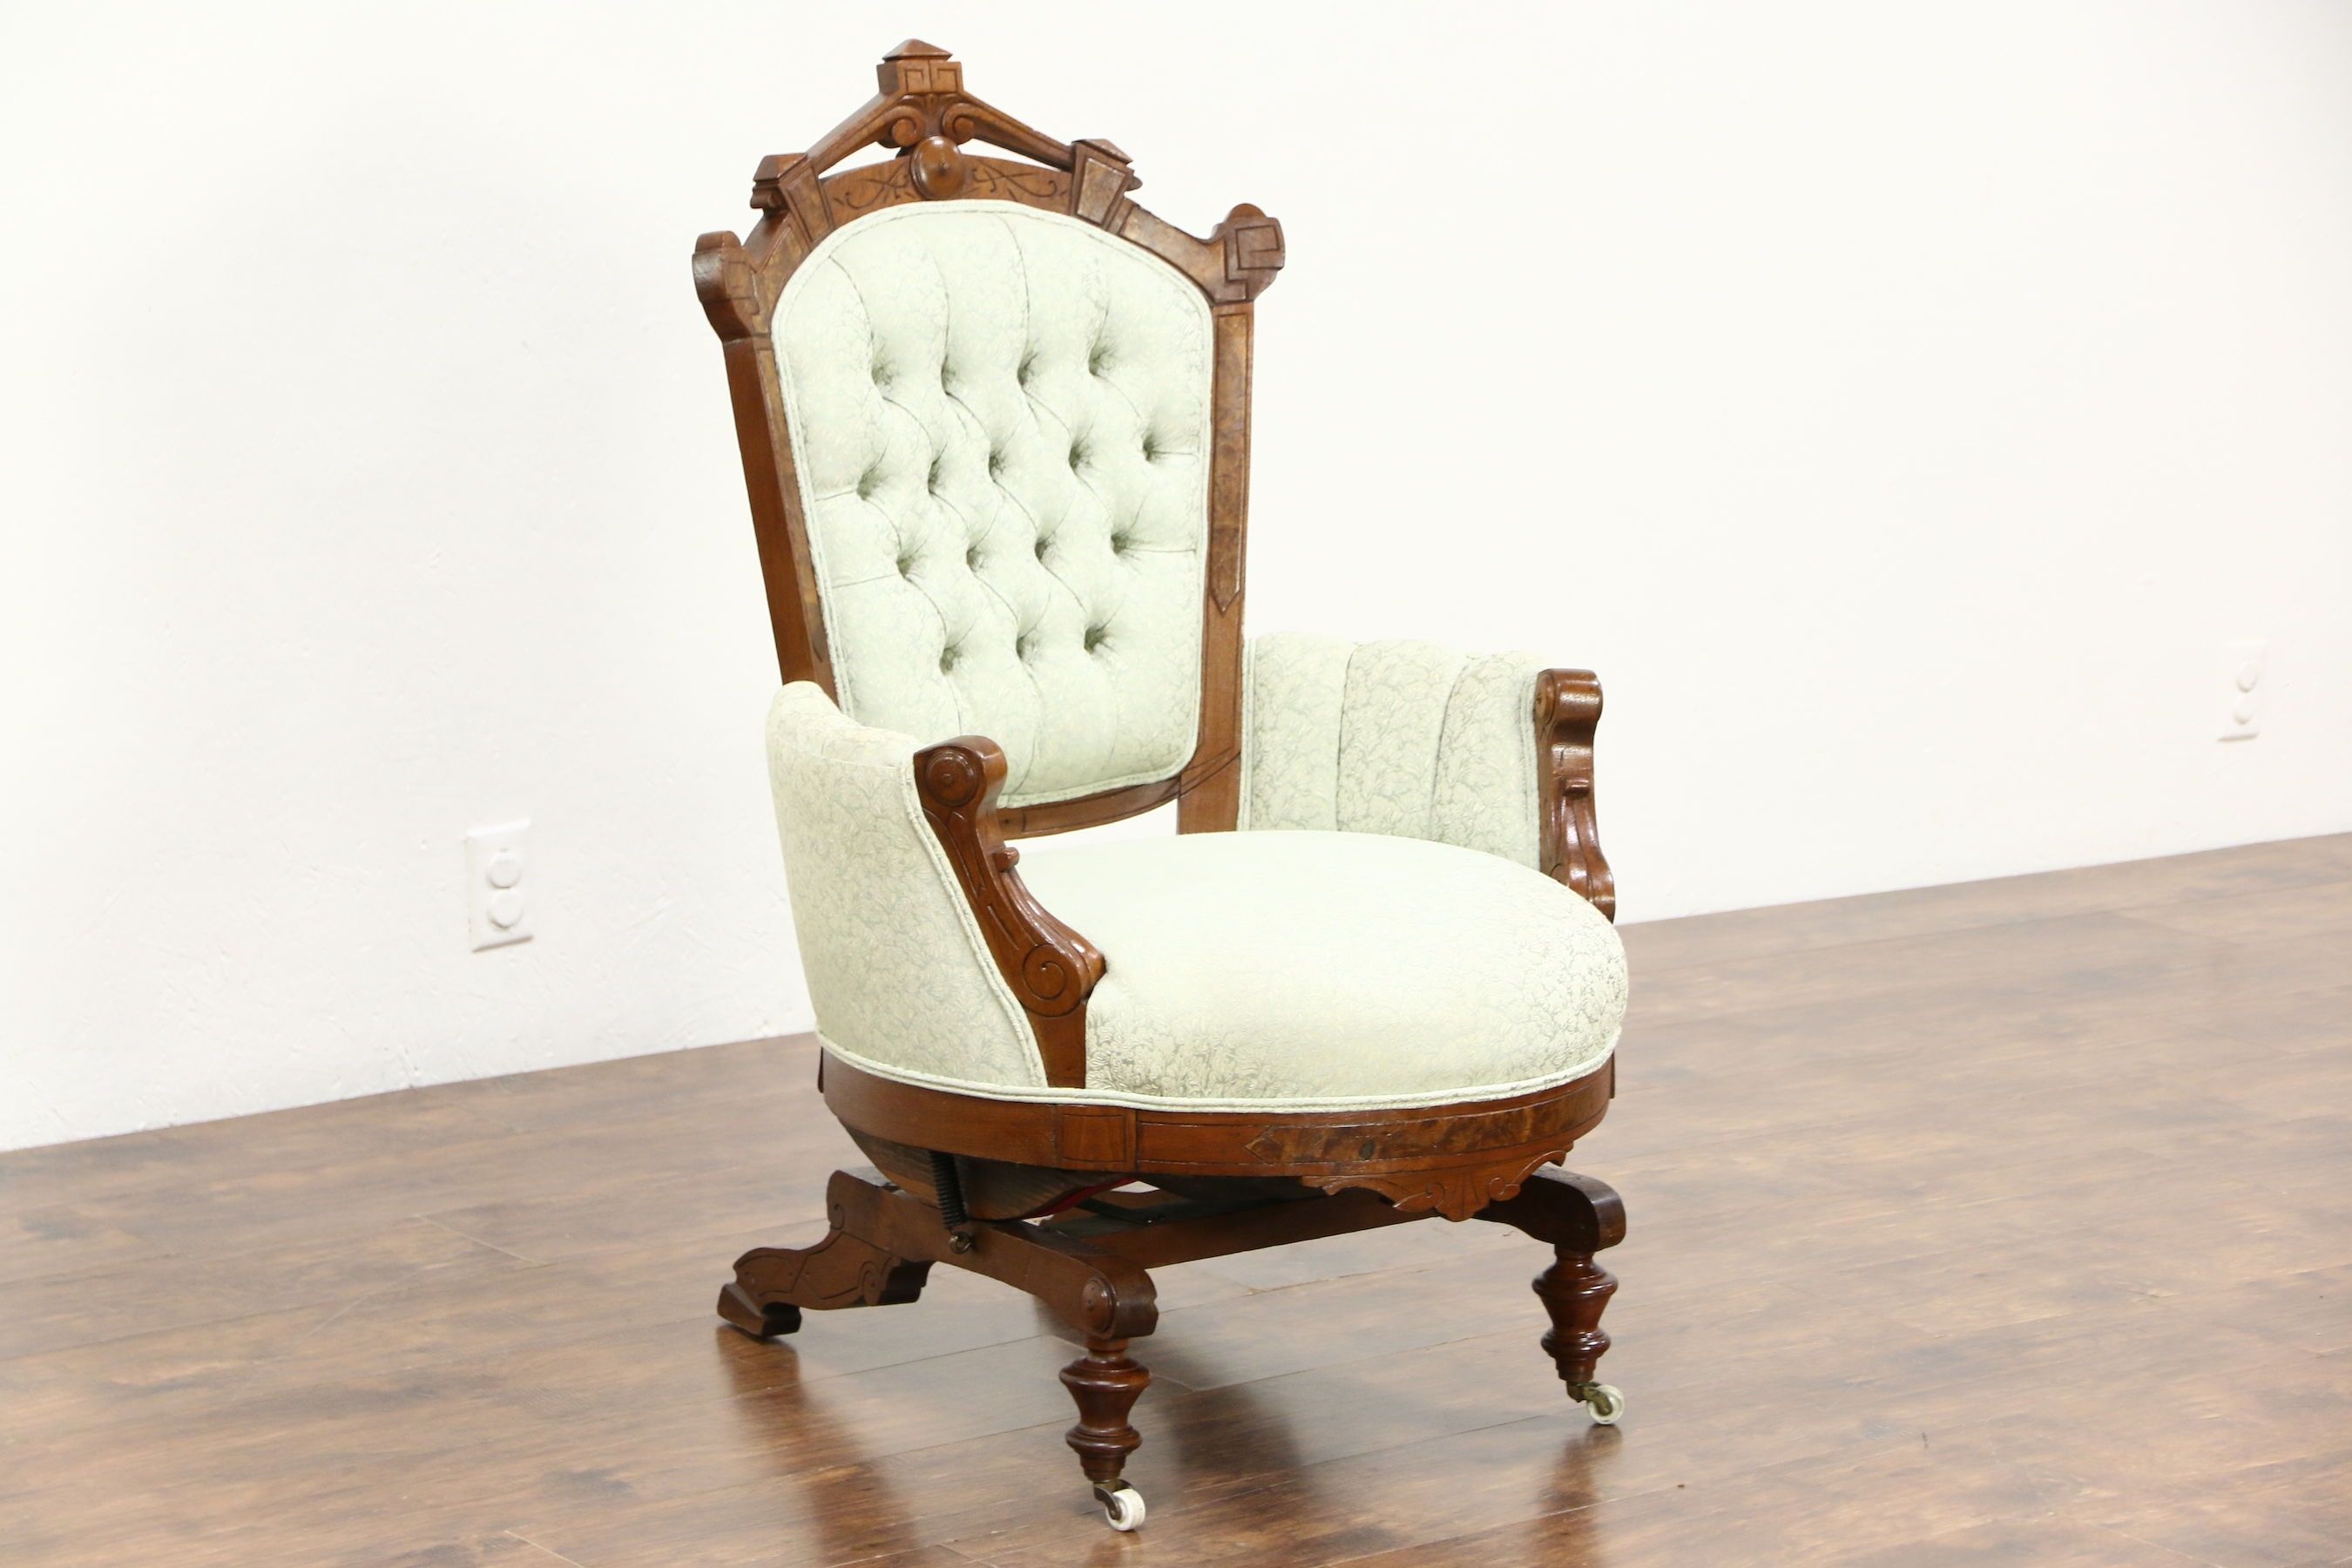 Sold – Victorian Eastlake Walnut Antique Stationary Rocker Or Pertaining To Victorian Rocking Chairs (View 12 of 15)